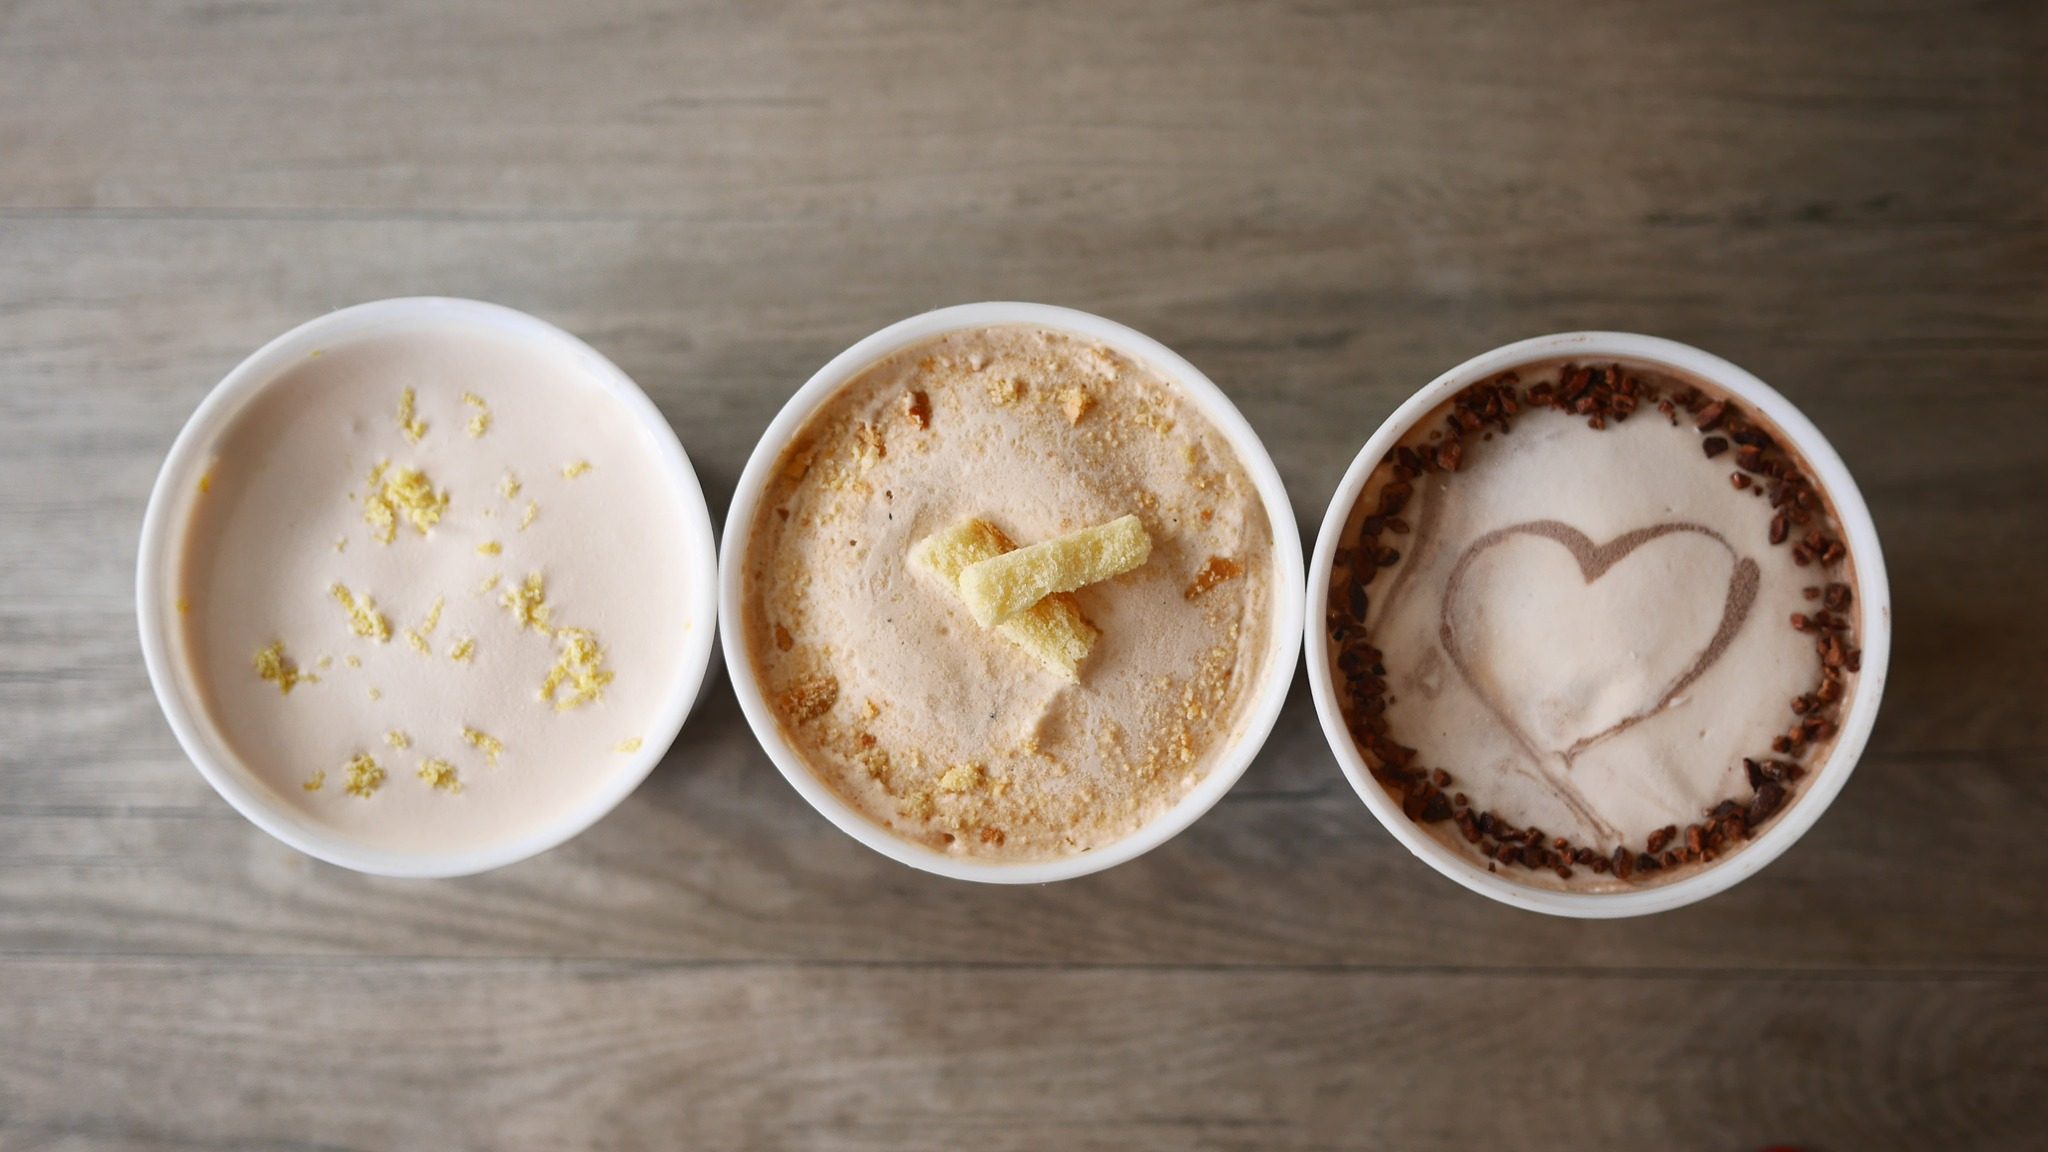 LOOK: Try coffee biscocho sorbetes, lemon tart sorbetes by this local ice cream shop